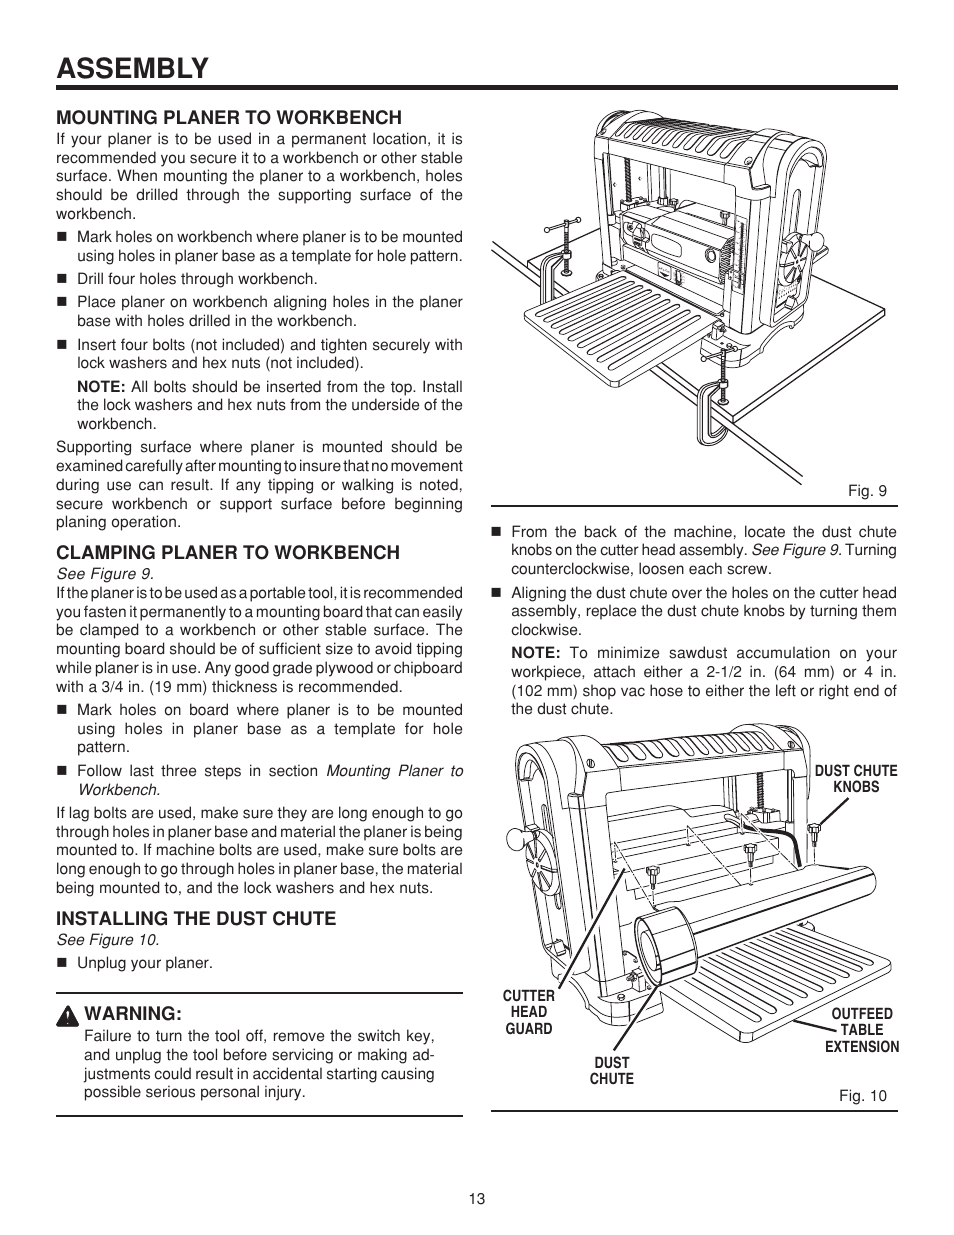 Assembly, Mounting planer to workbench, Clamping planer to workbench